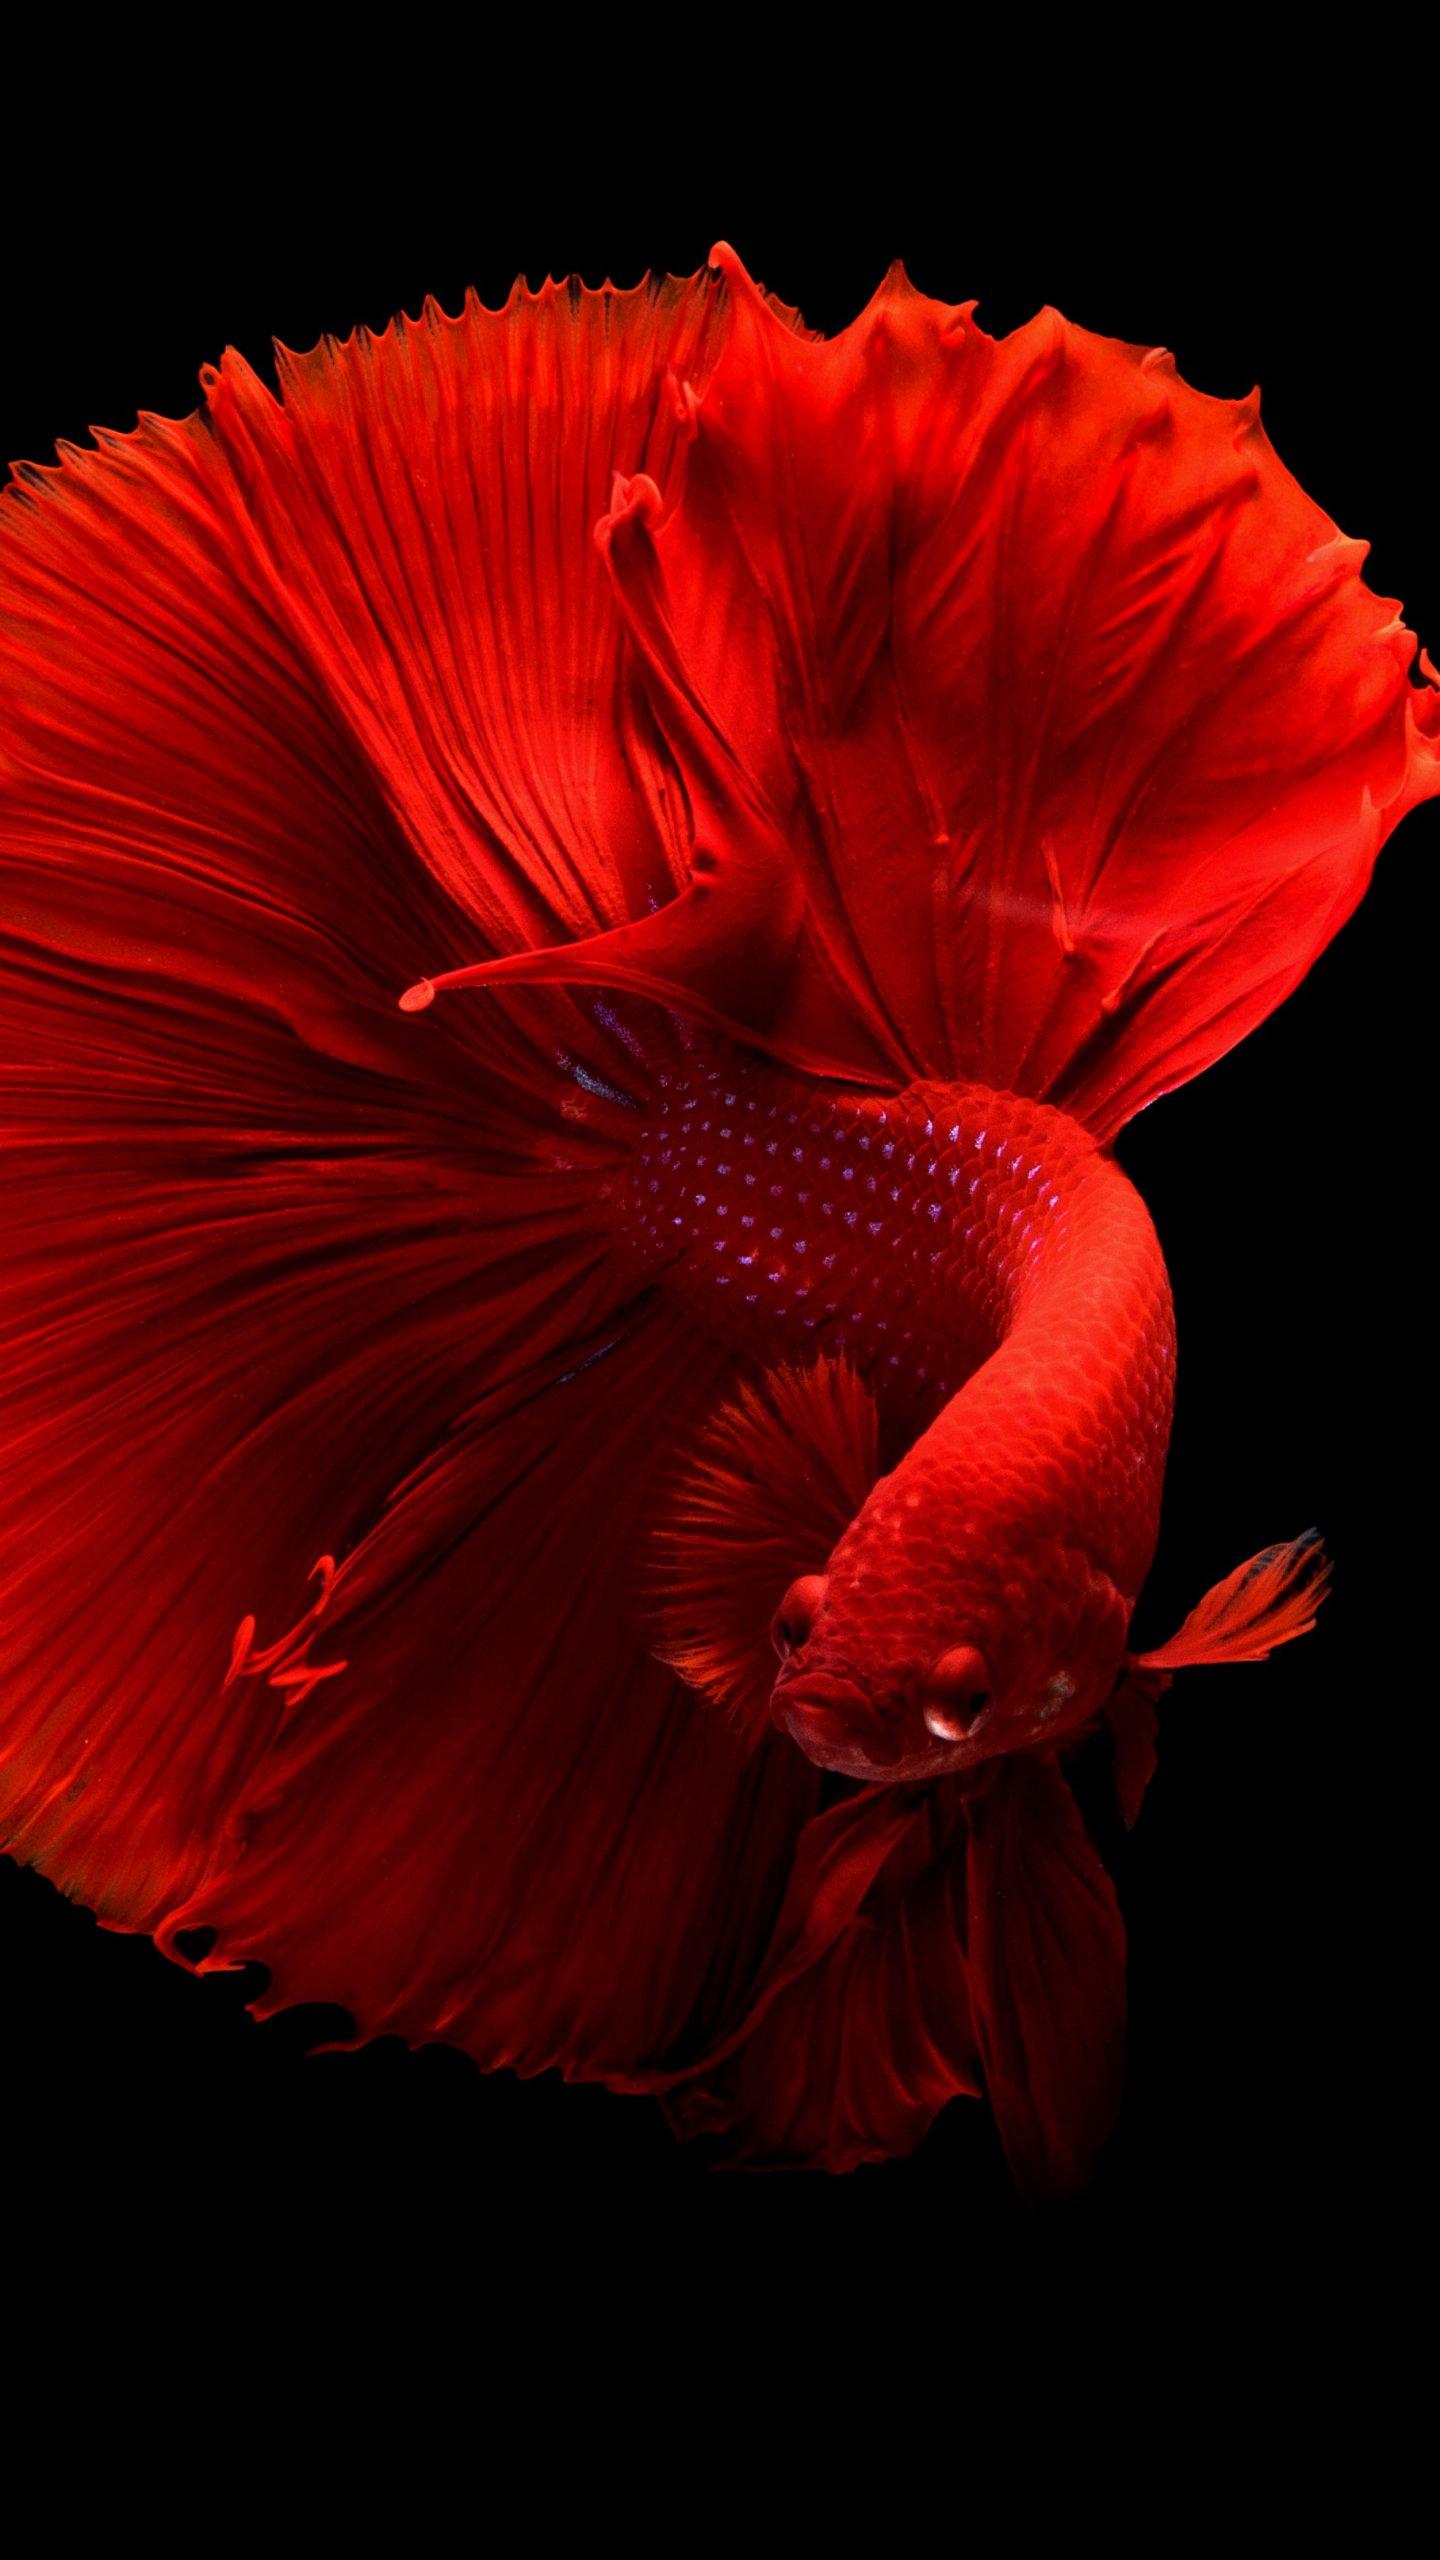 Siamese Fighting Fish Wallpaper, Android & Desktop Background